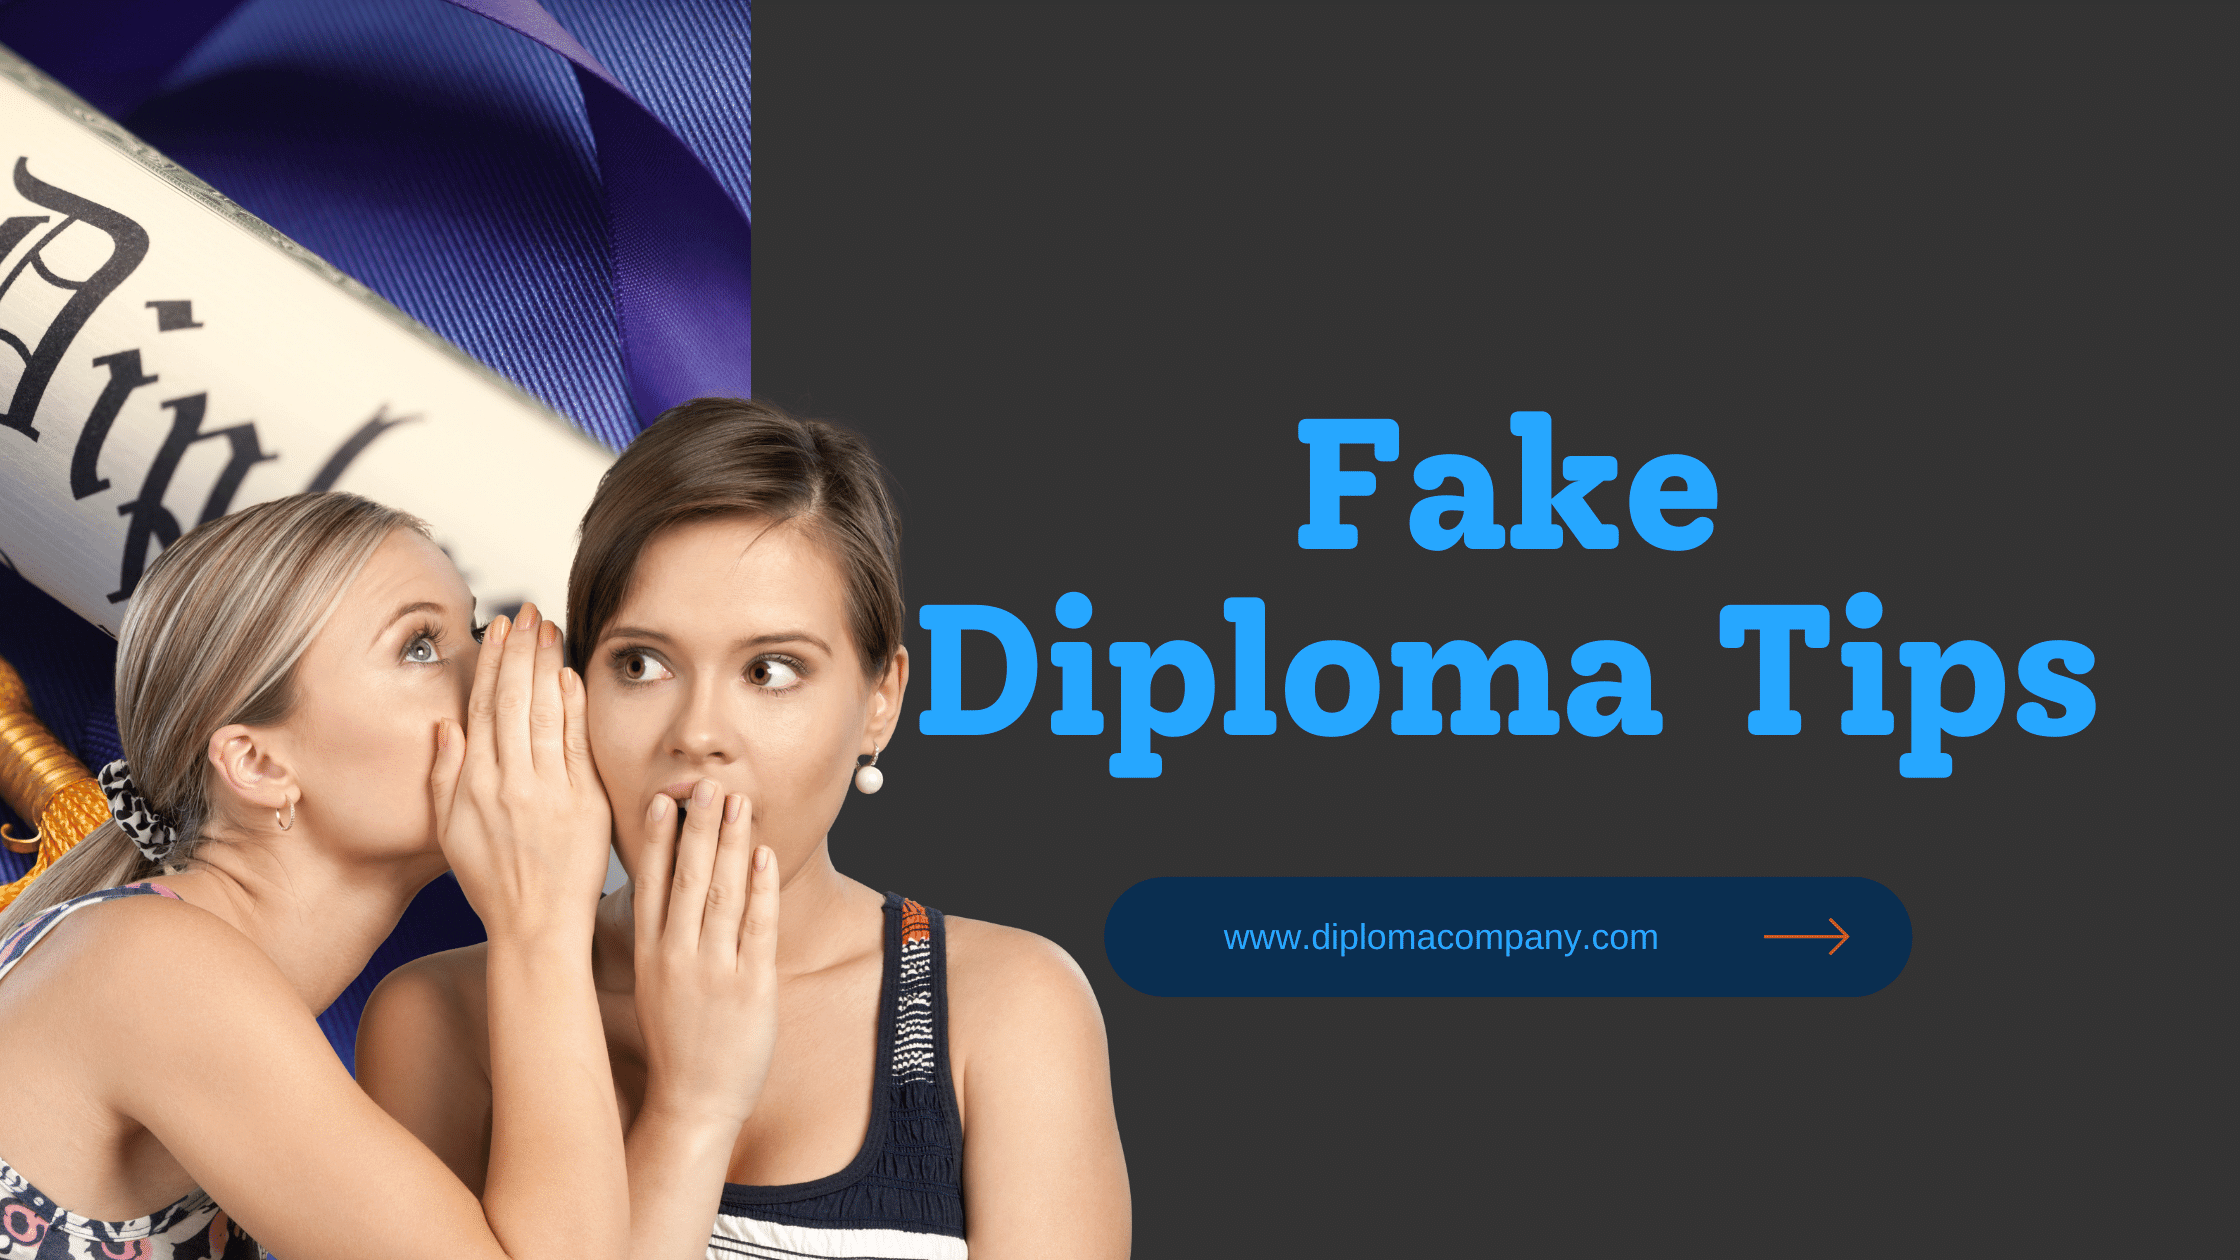 two woman discussing tips when ordering fake diplomas online